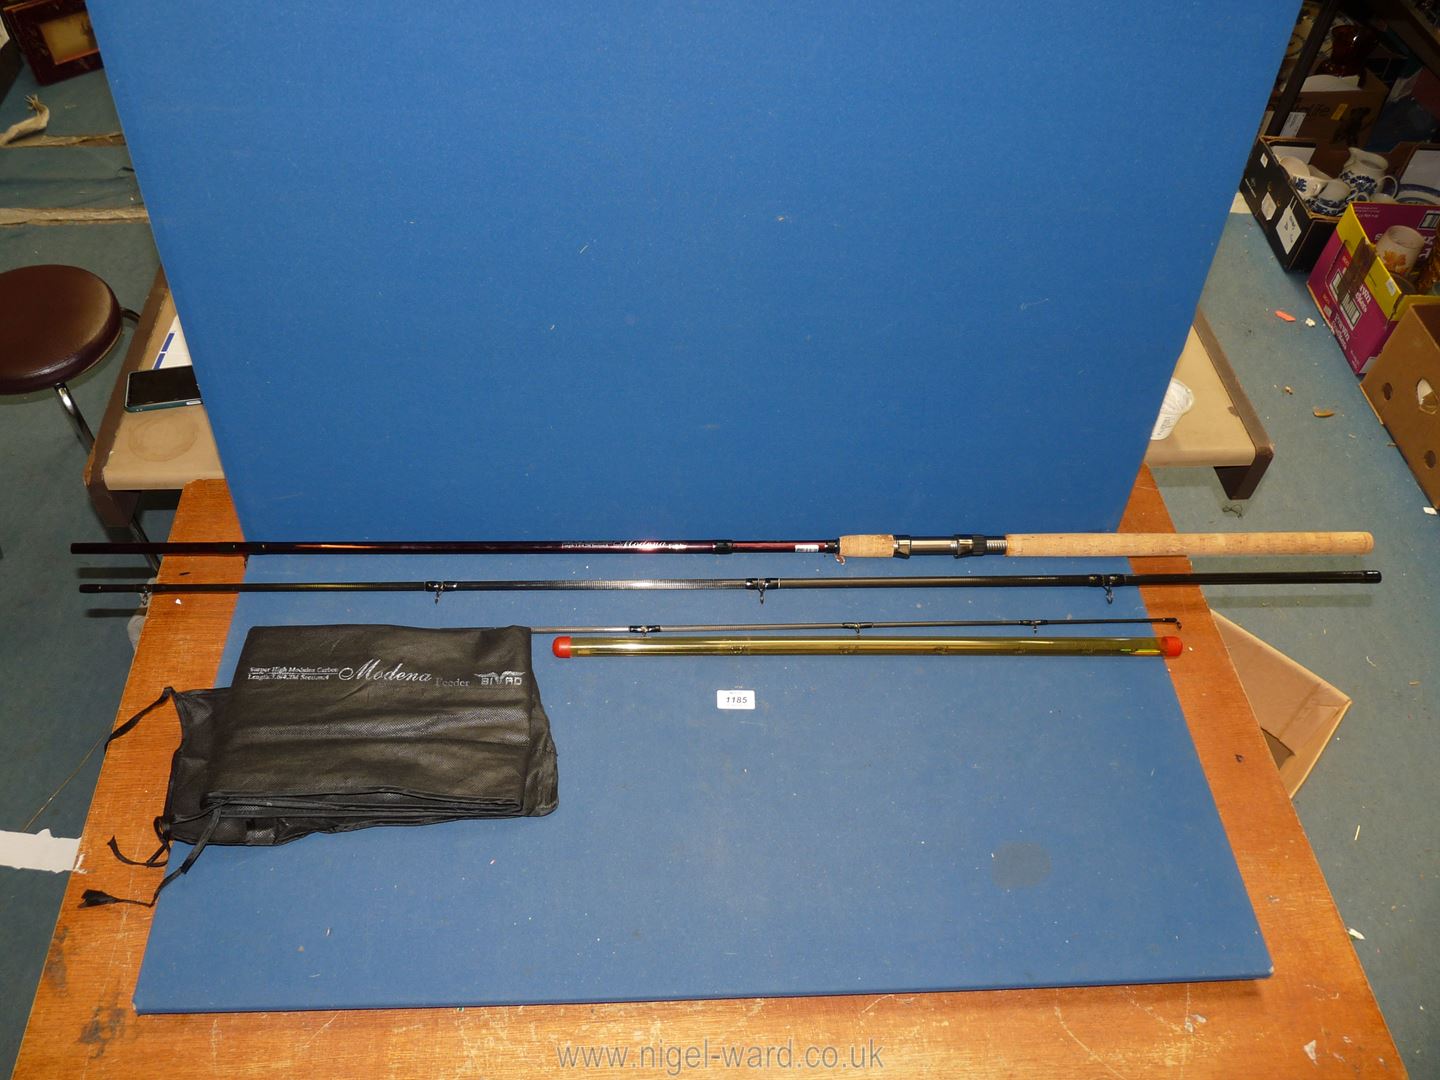 A 12' Moderna Feeder four-section carbon fibre fishing rod, with spare tips.